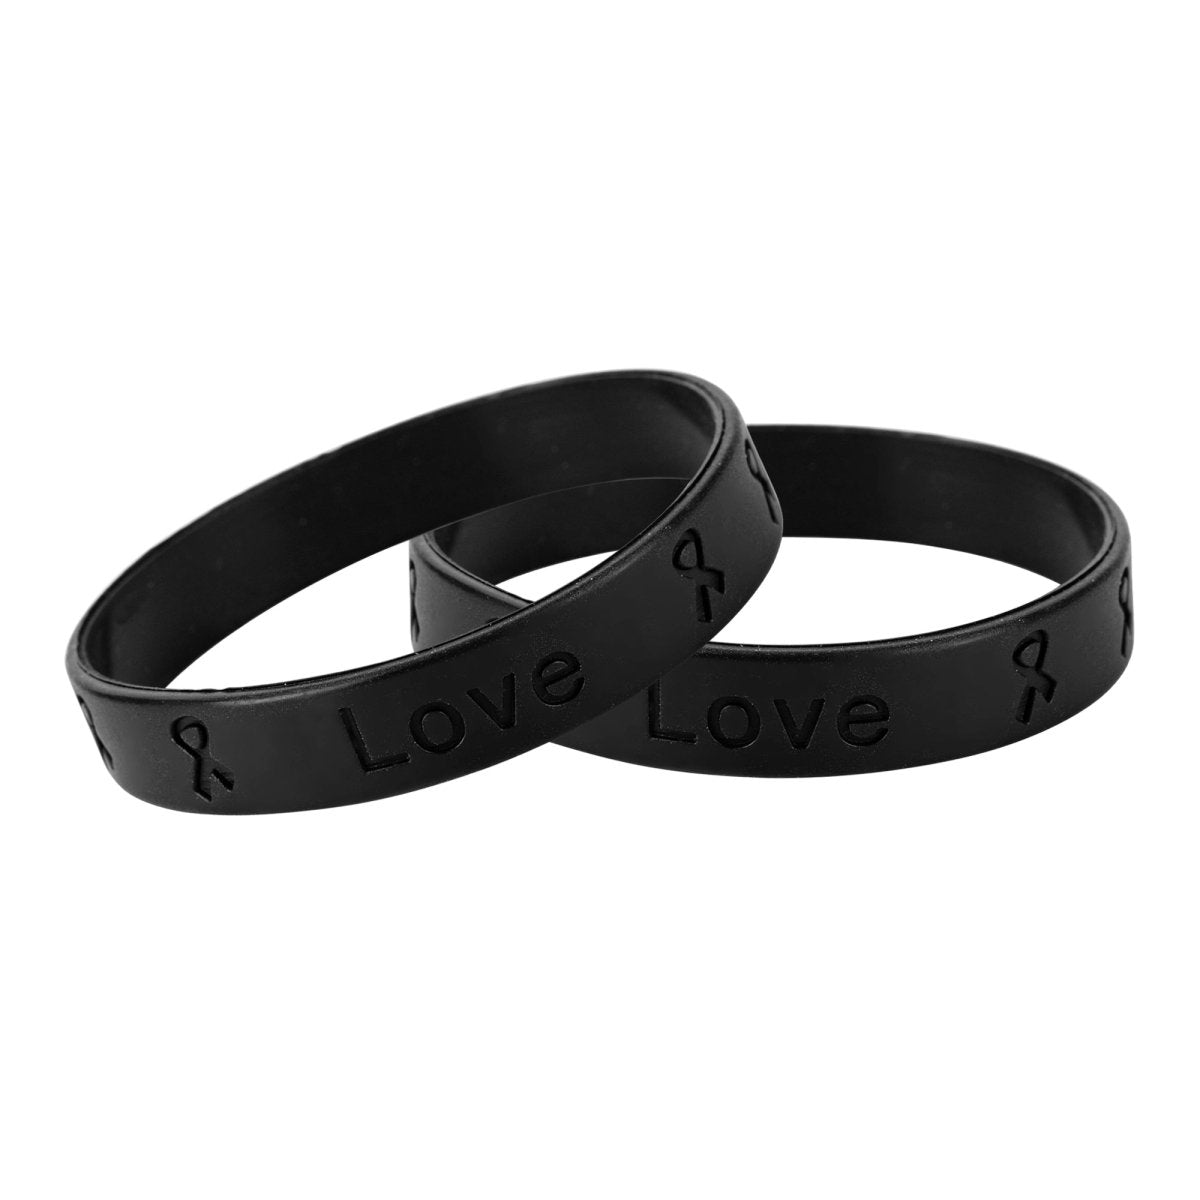 Adult Melanoma Awareness Silicone Bracelet Wristbands - Fundraising For A Cause